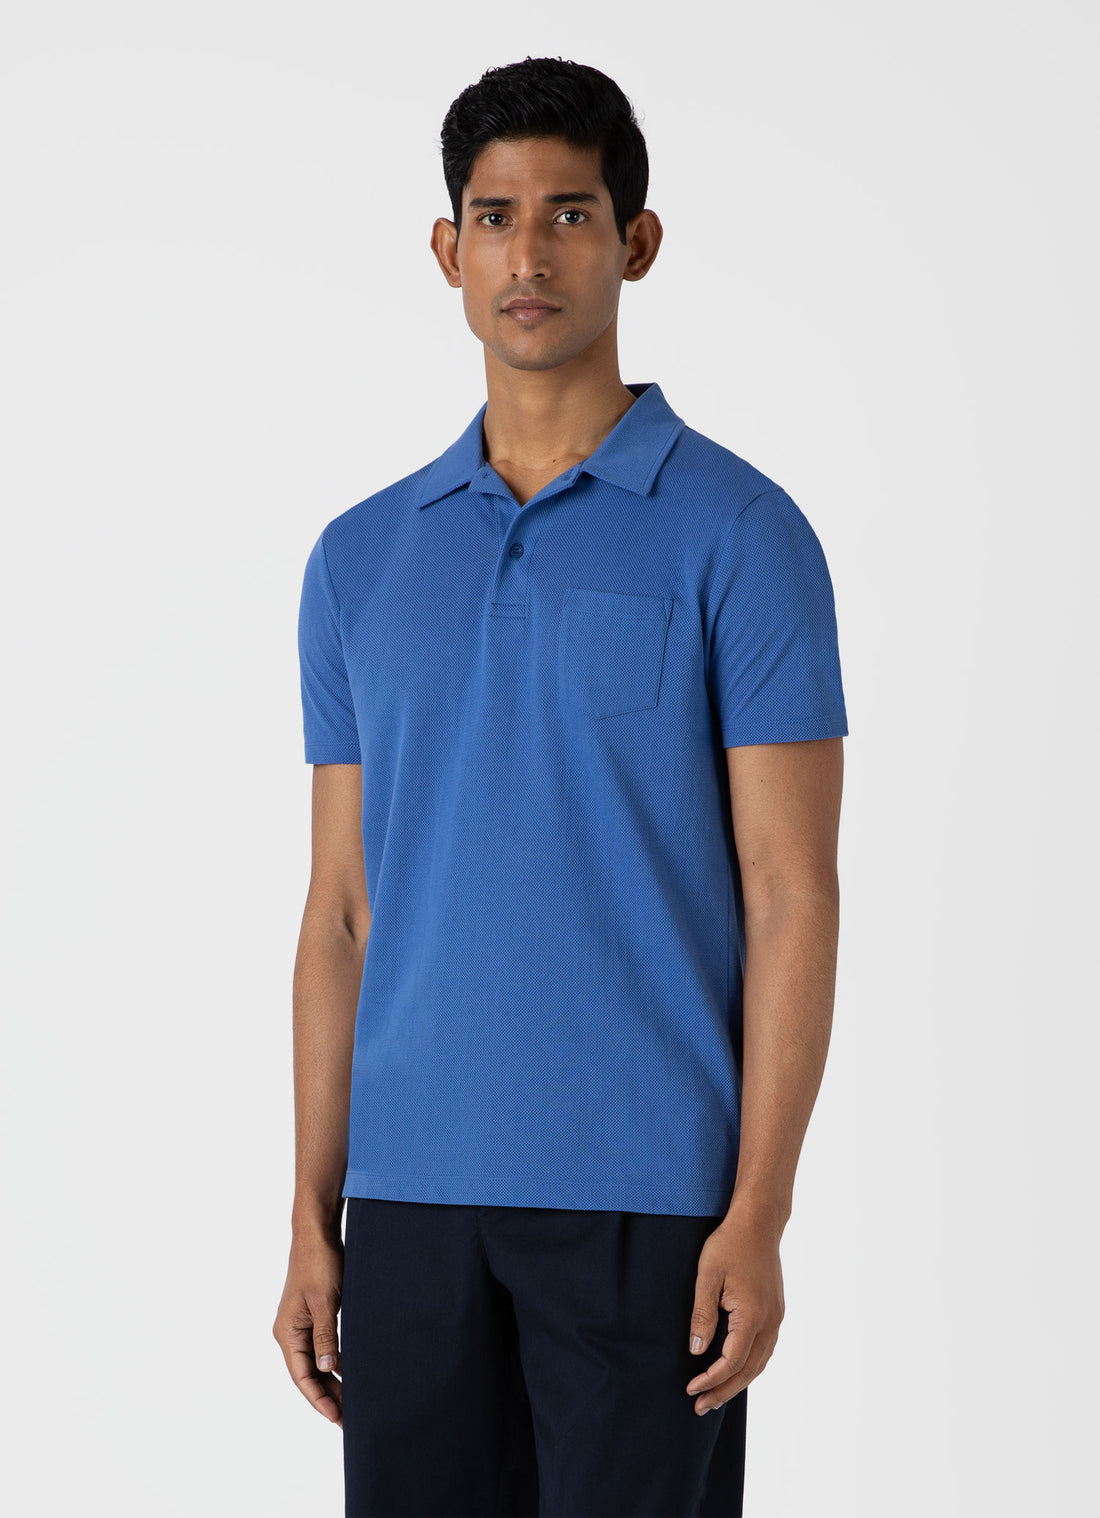 Men's Riviera Polo Shirt in French Blue